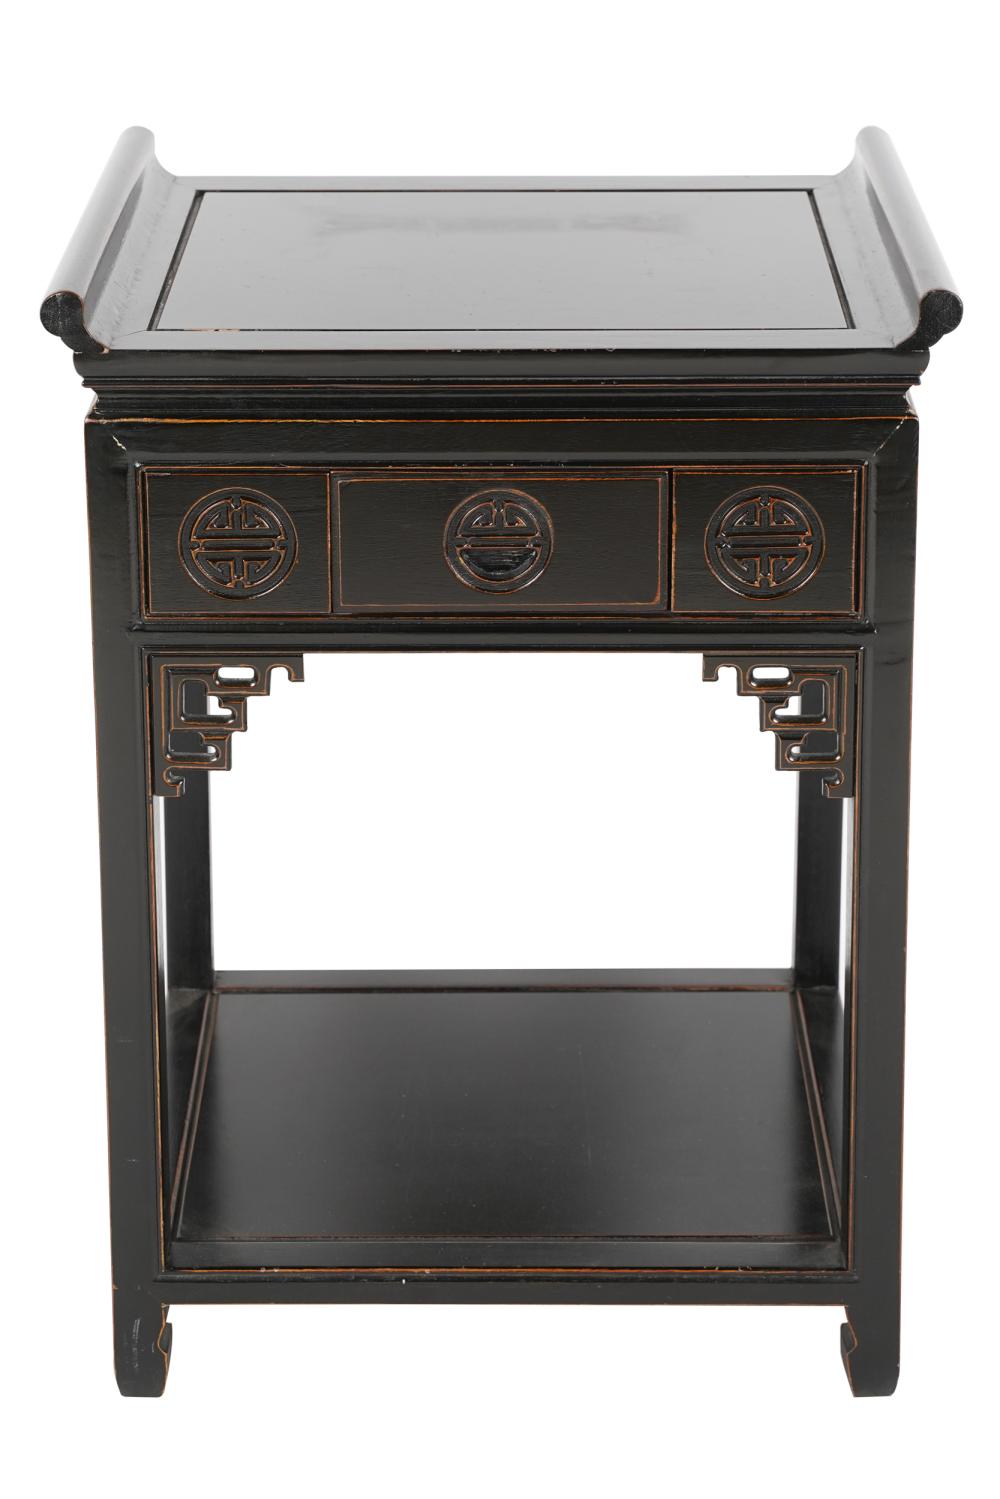 CHINESE STYLE END TABLEwith single drawer;